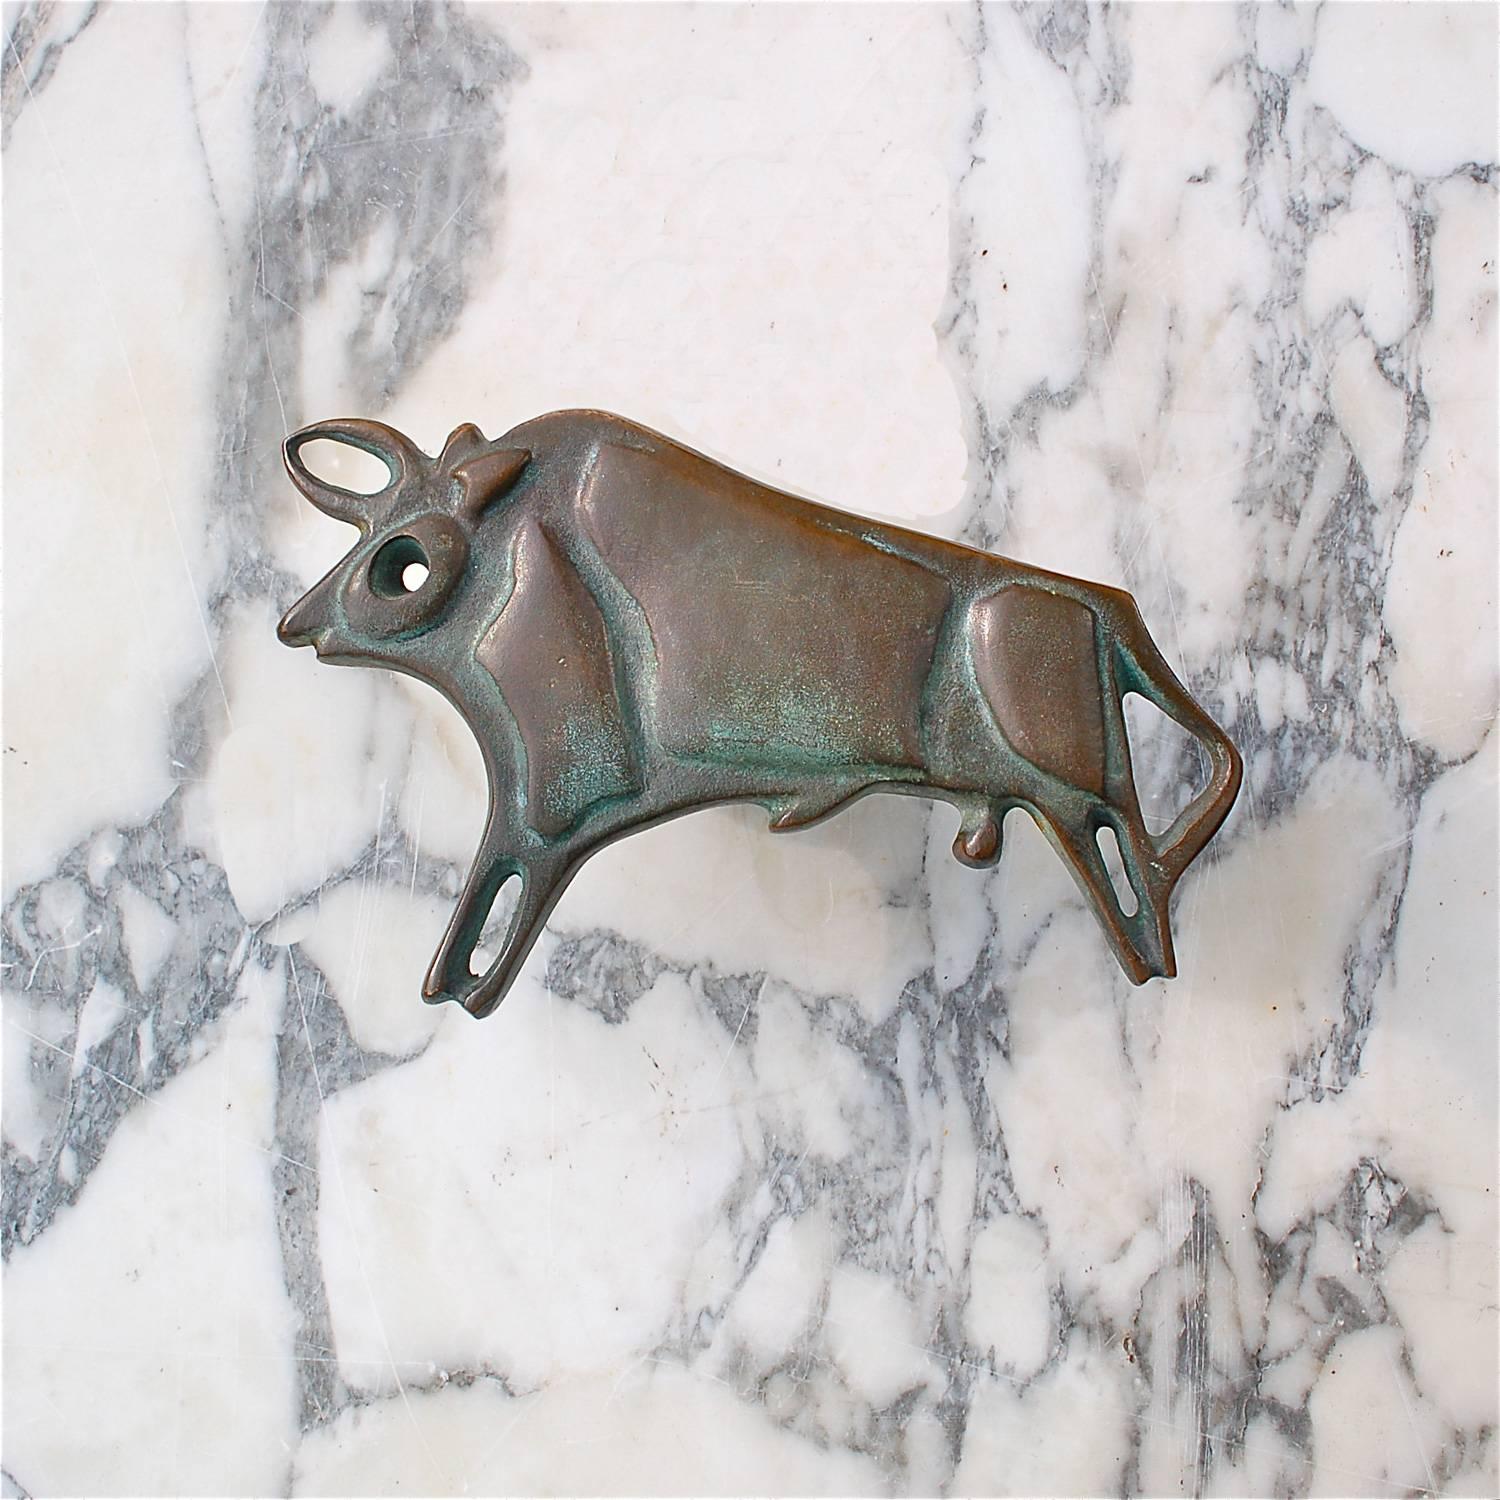 Solid bronze door handle in the shape of a bull, suitable for push and pull doors. The finish and quality of the cast is a sign of its quality and despite the lack of a signature we feel it could be a one off creation by an unknown artist. The